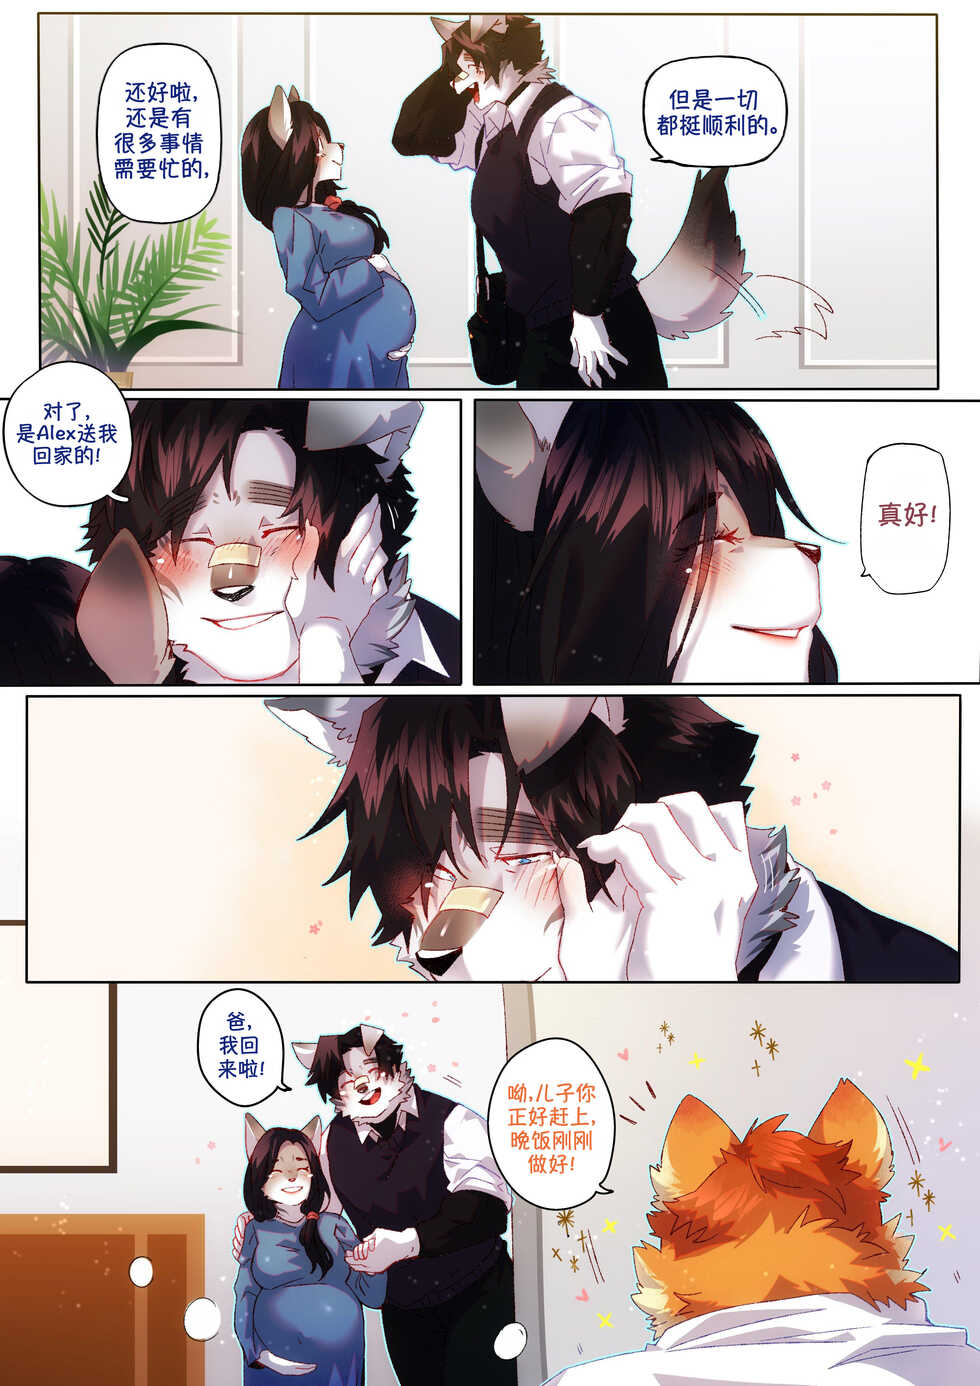 [BooBoo] Passionate Affection 深挚 [Chinese Ver.]  (On Going) - Page 20